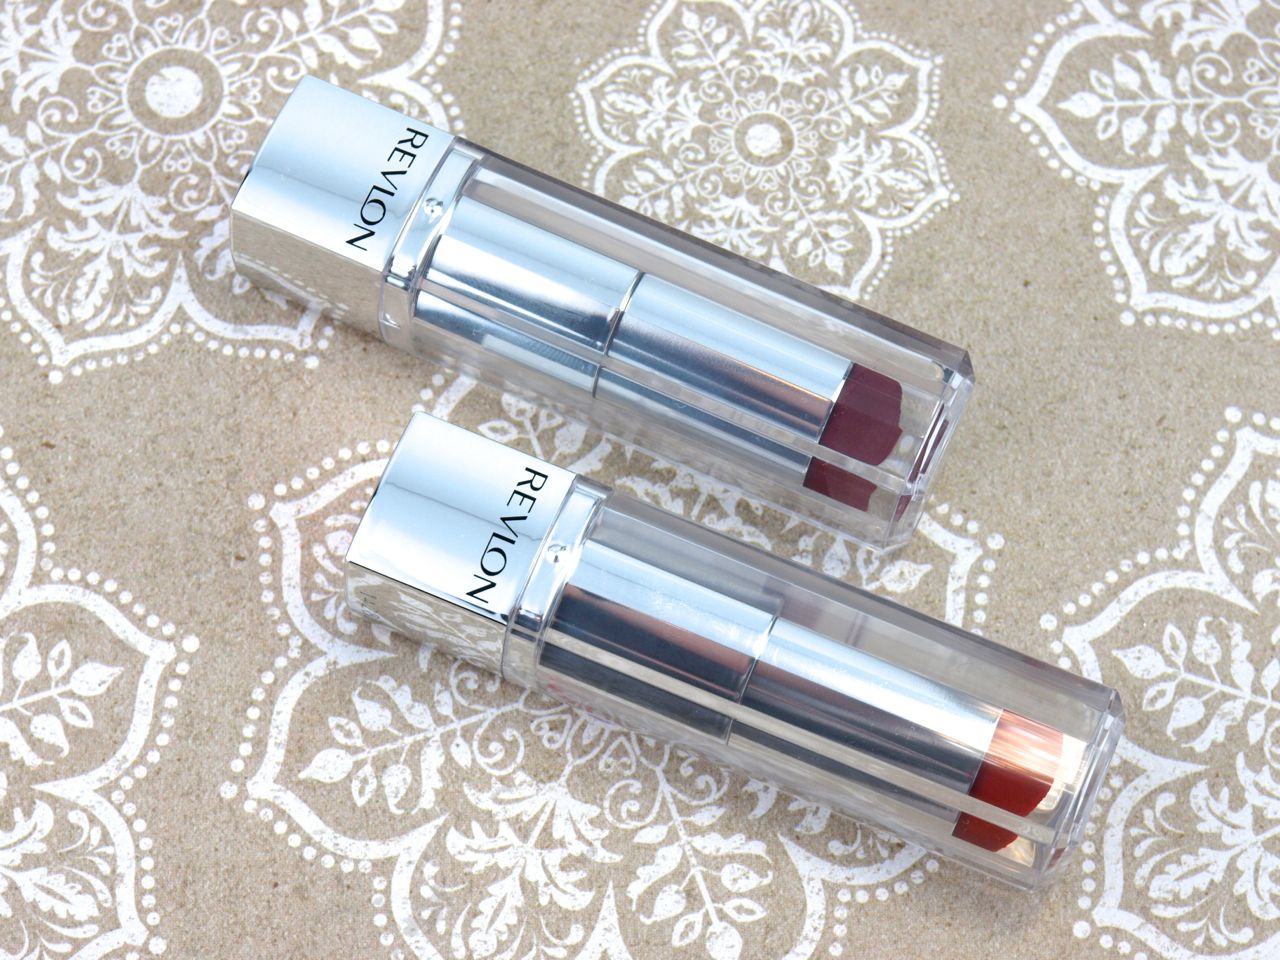 Revlon Ultra HD Lipstick in "Gladiolus" & "Iris": Review and Swatches